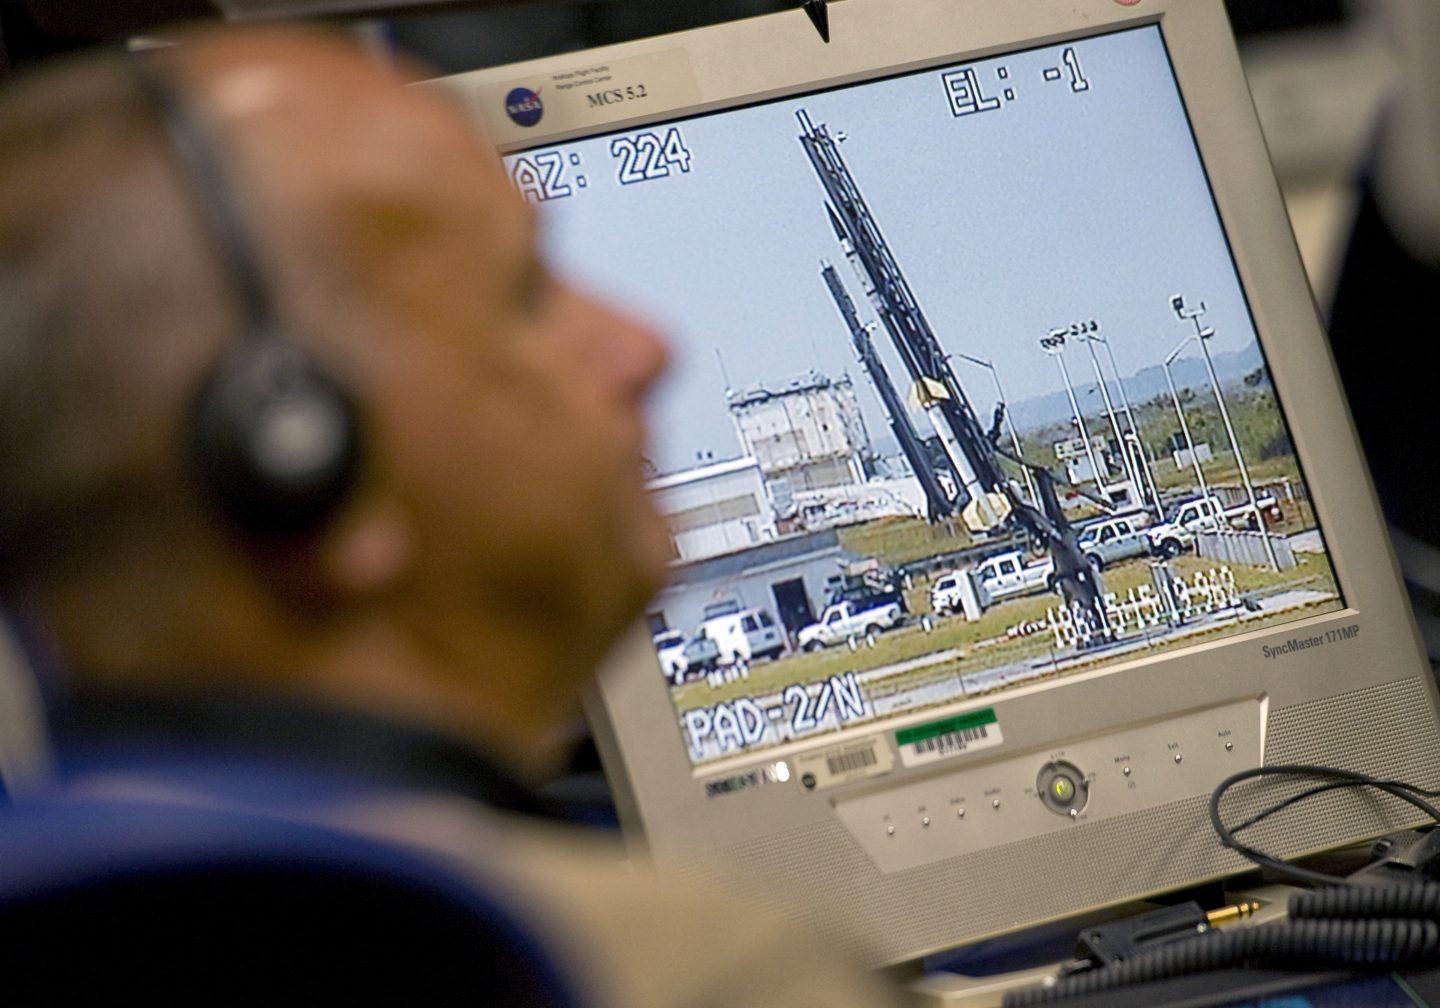 NASA staff monitor the launch of a sounding rocket.